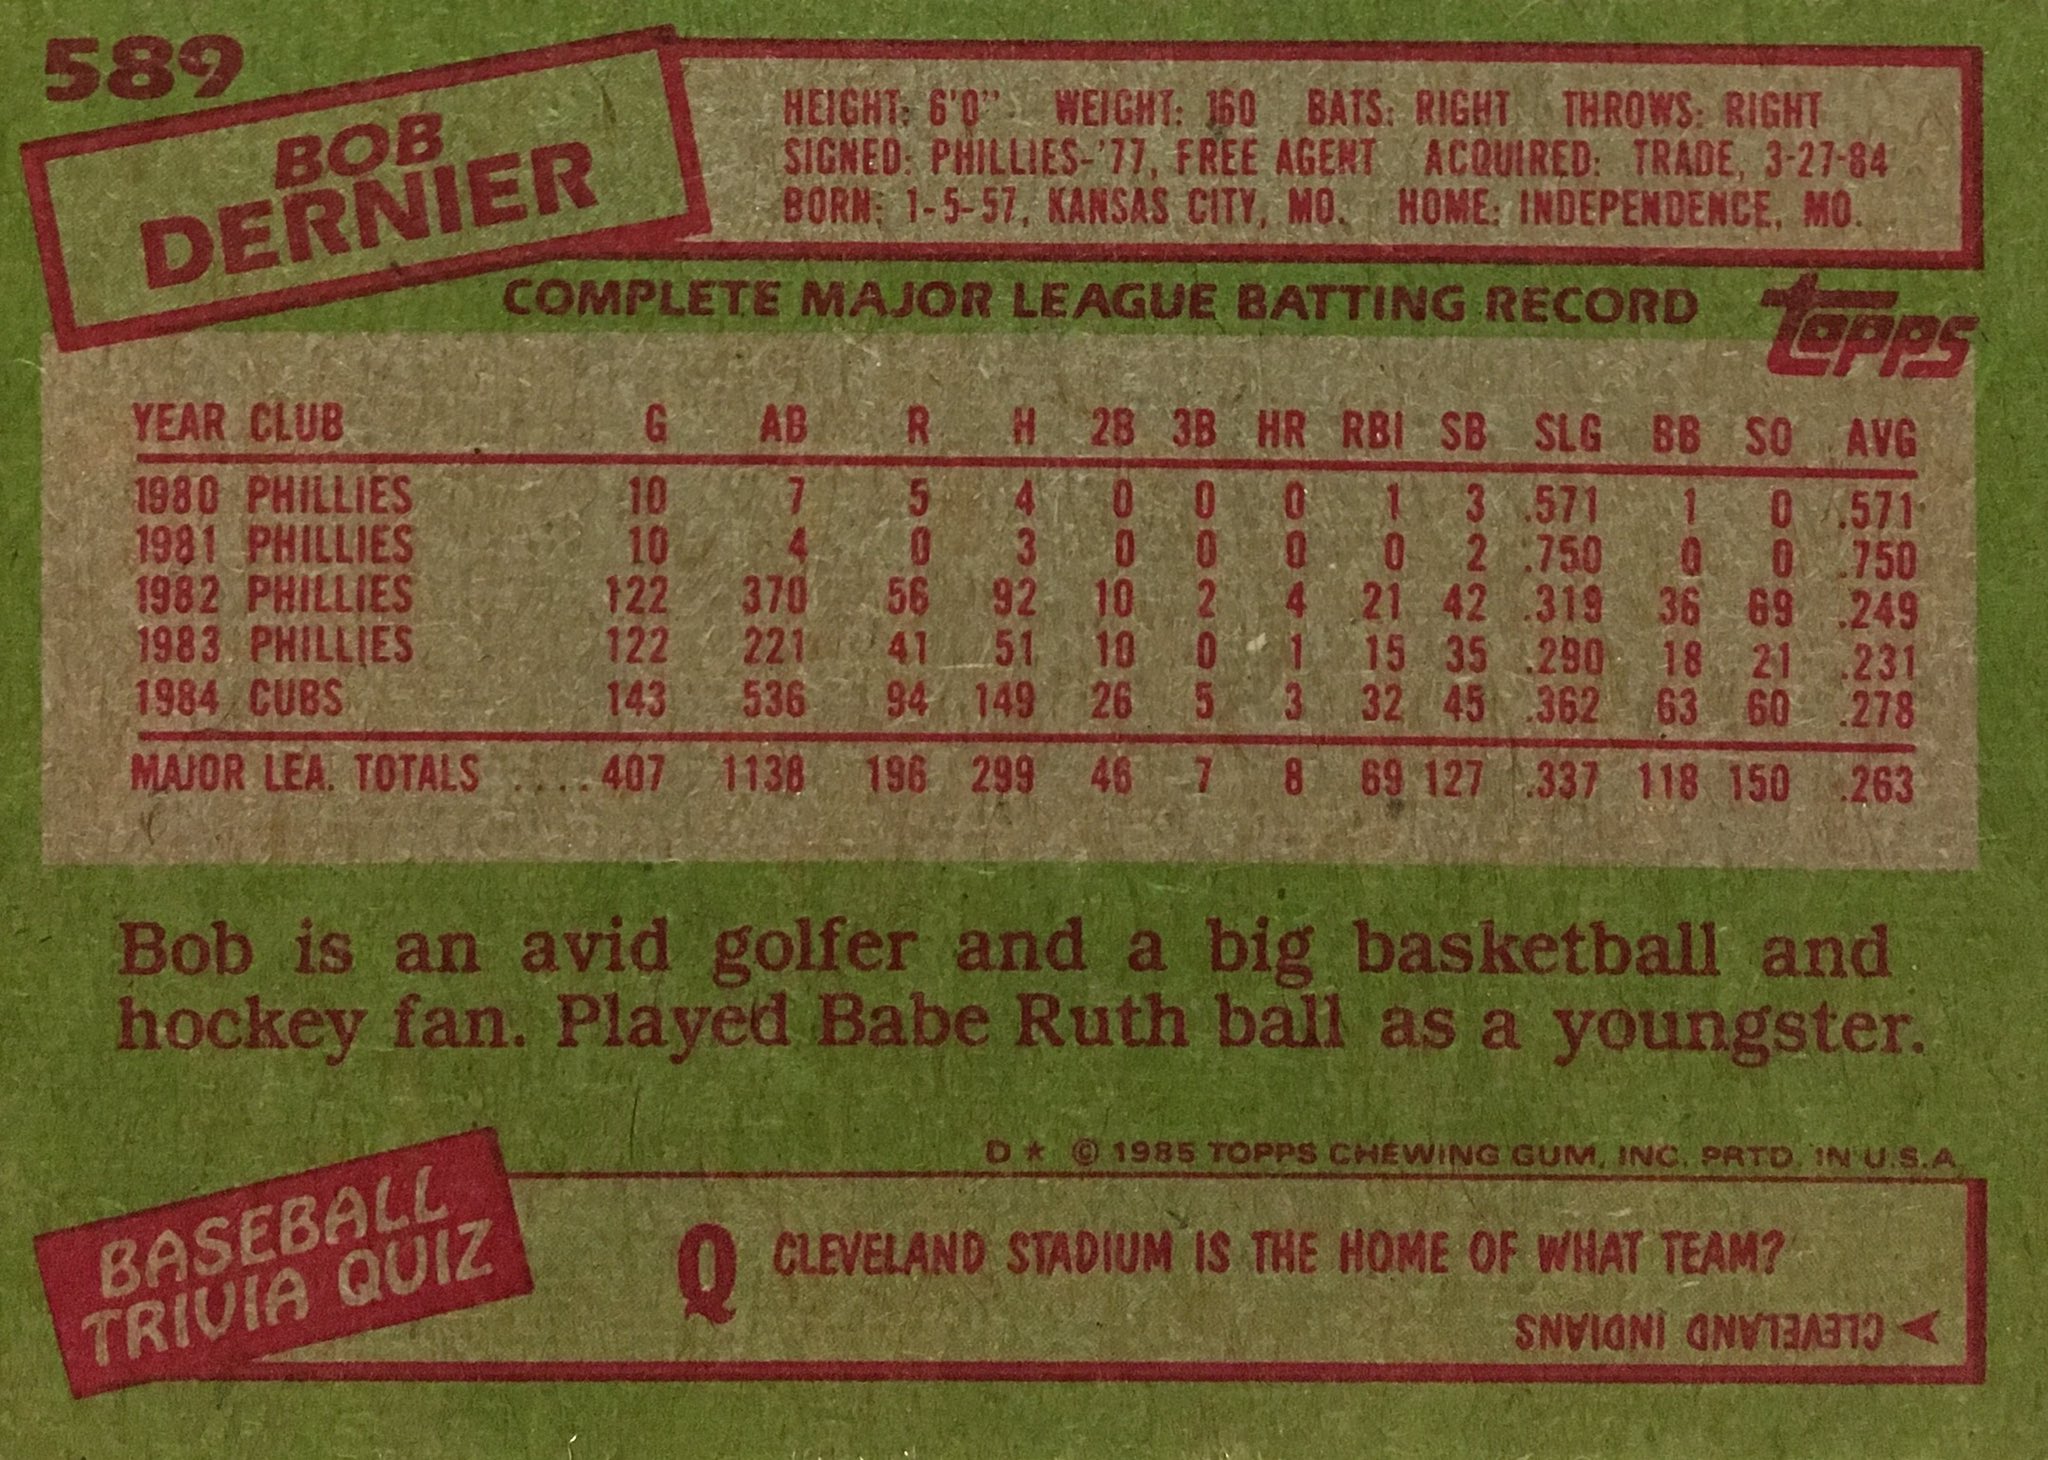 Baseball Card Backs On Twitter Topps Rolled Out The Expert Level Trivia Questions For Its 1985 Set Https T Co Xcmvdgtie2 Twitter